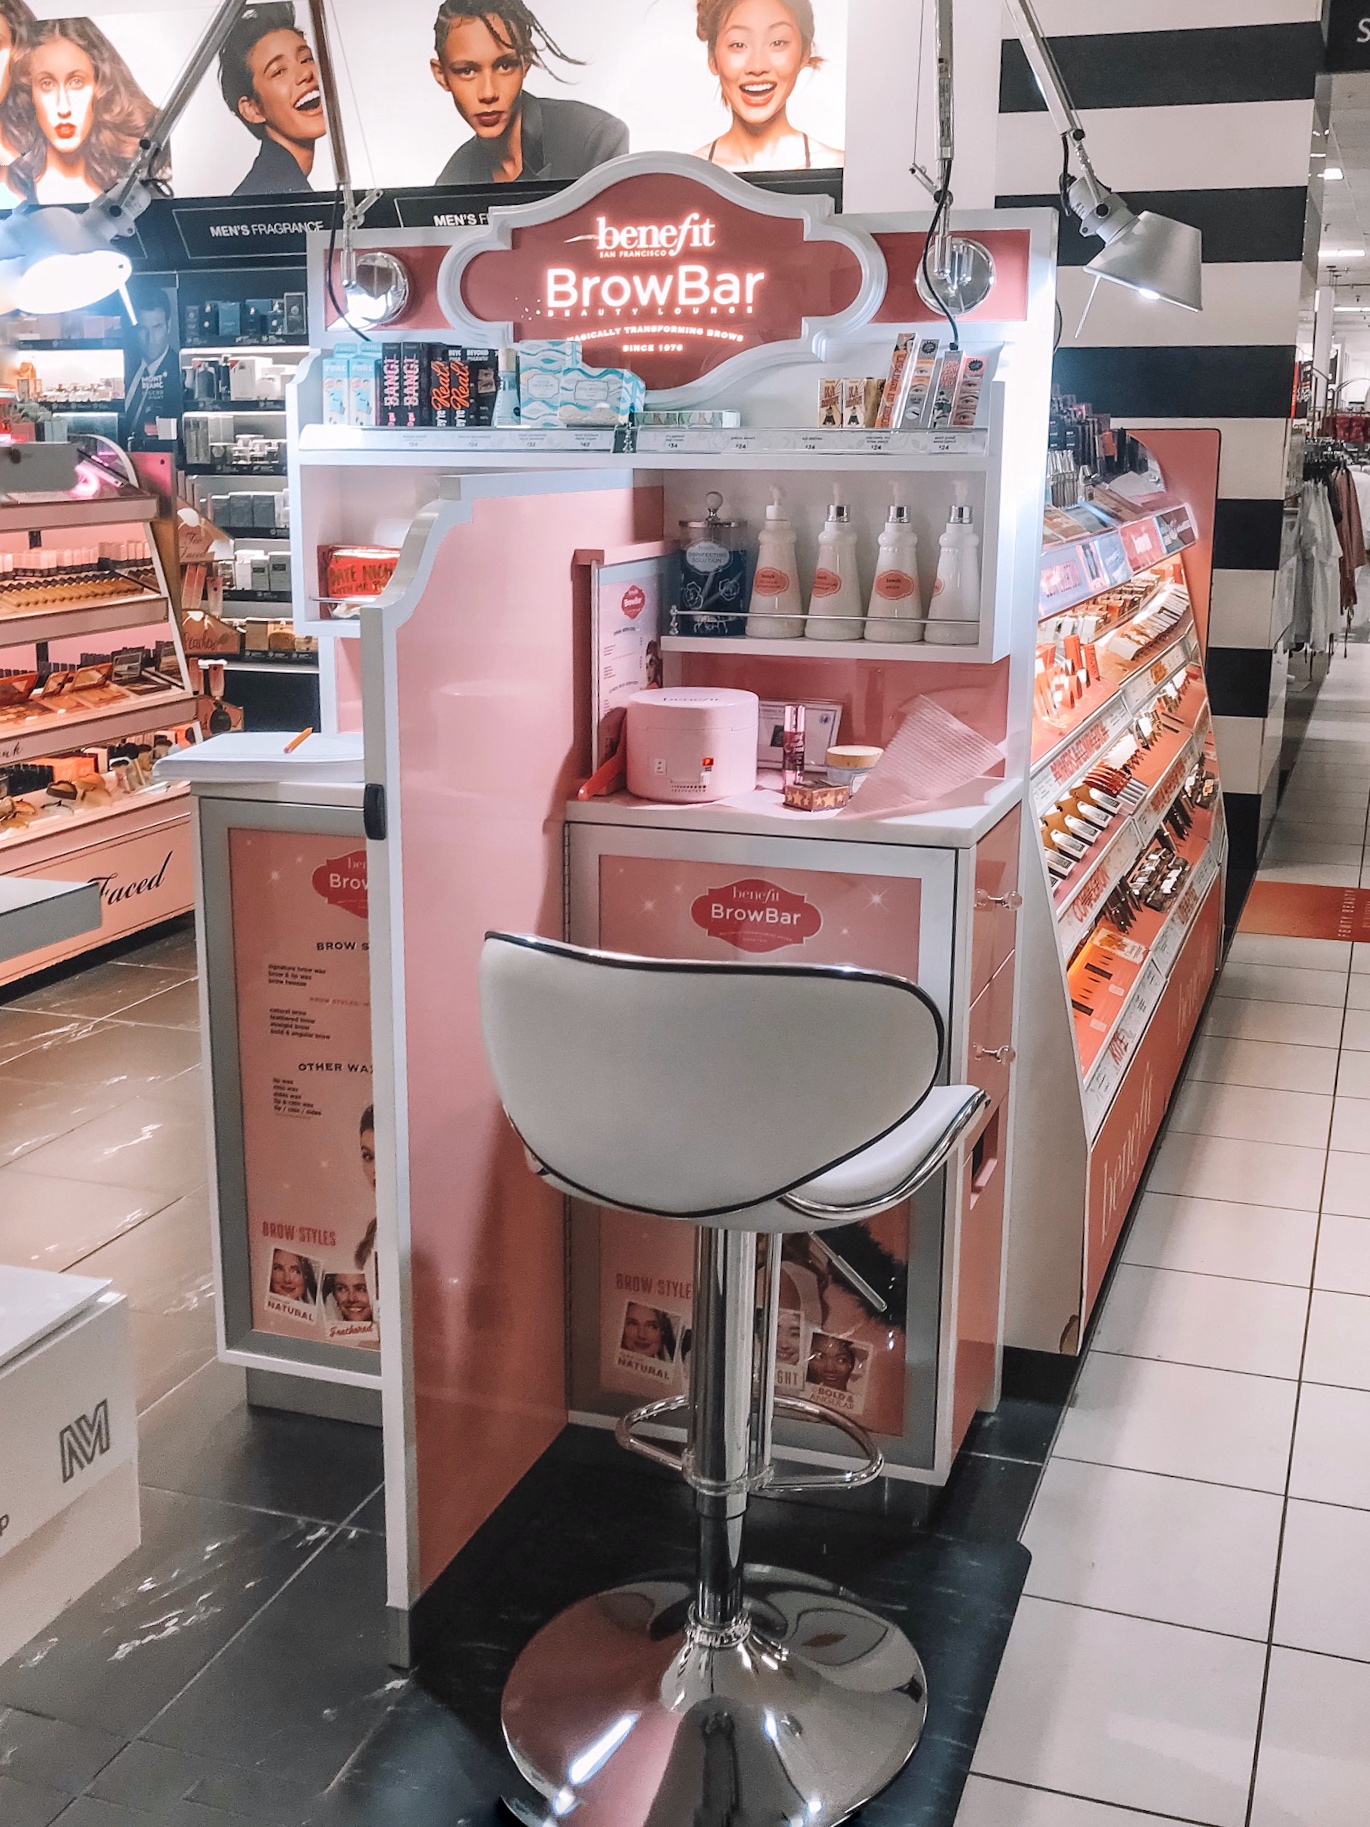 Benefit BrowBar at Sephora inside JCPenney